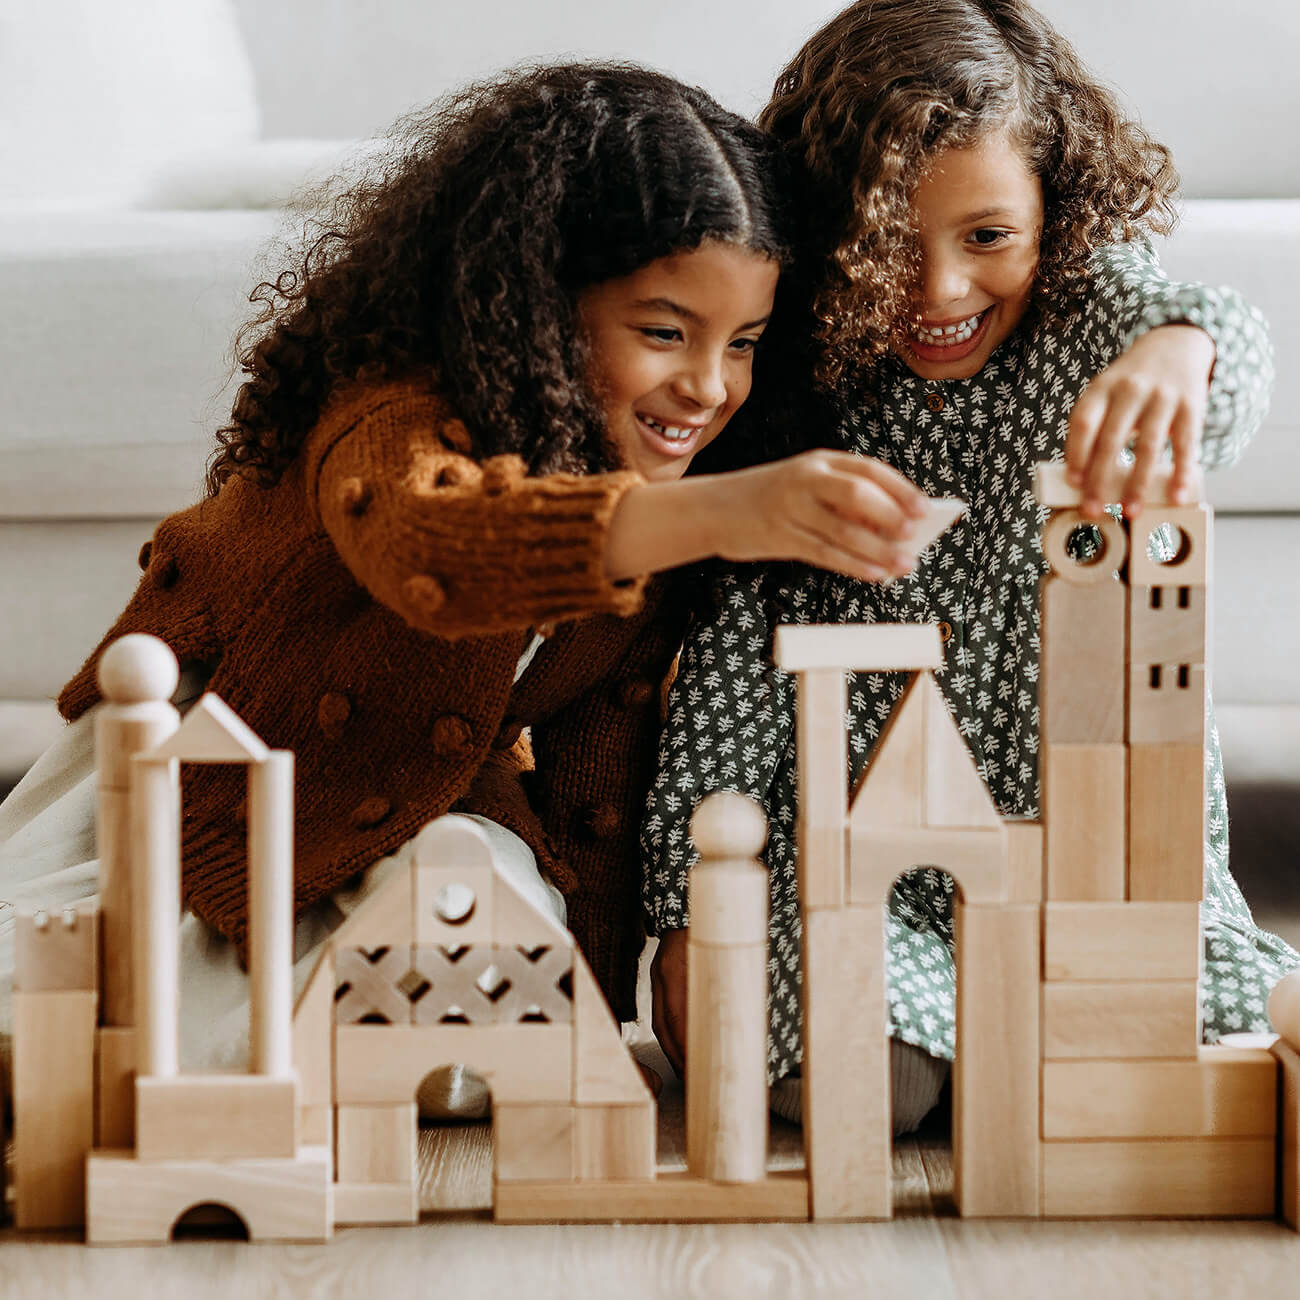 Two girls working together building a city out of HABA wooden blocks